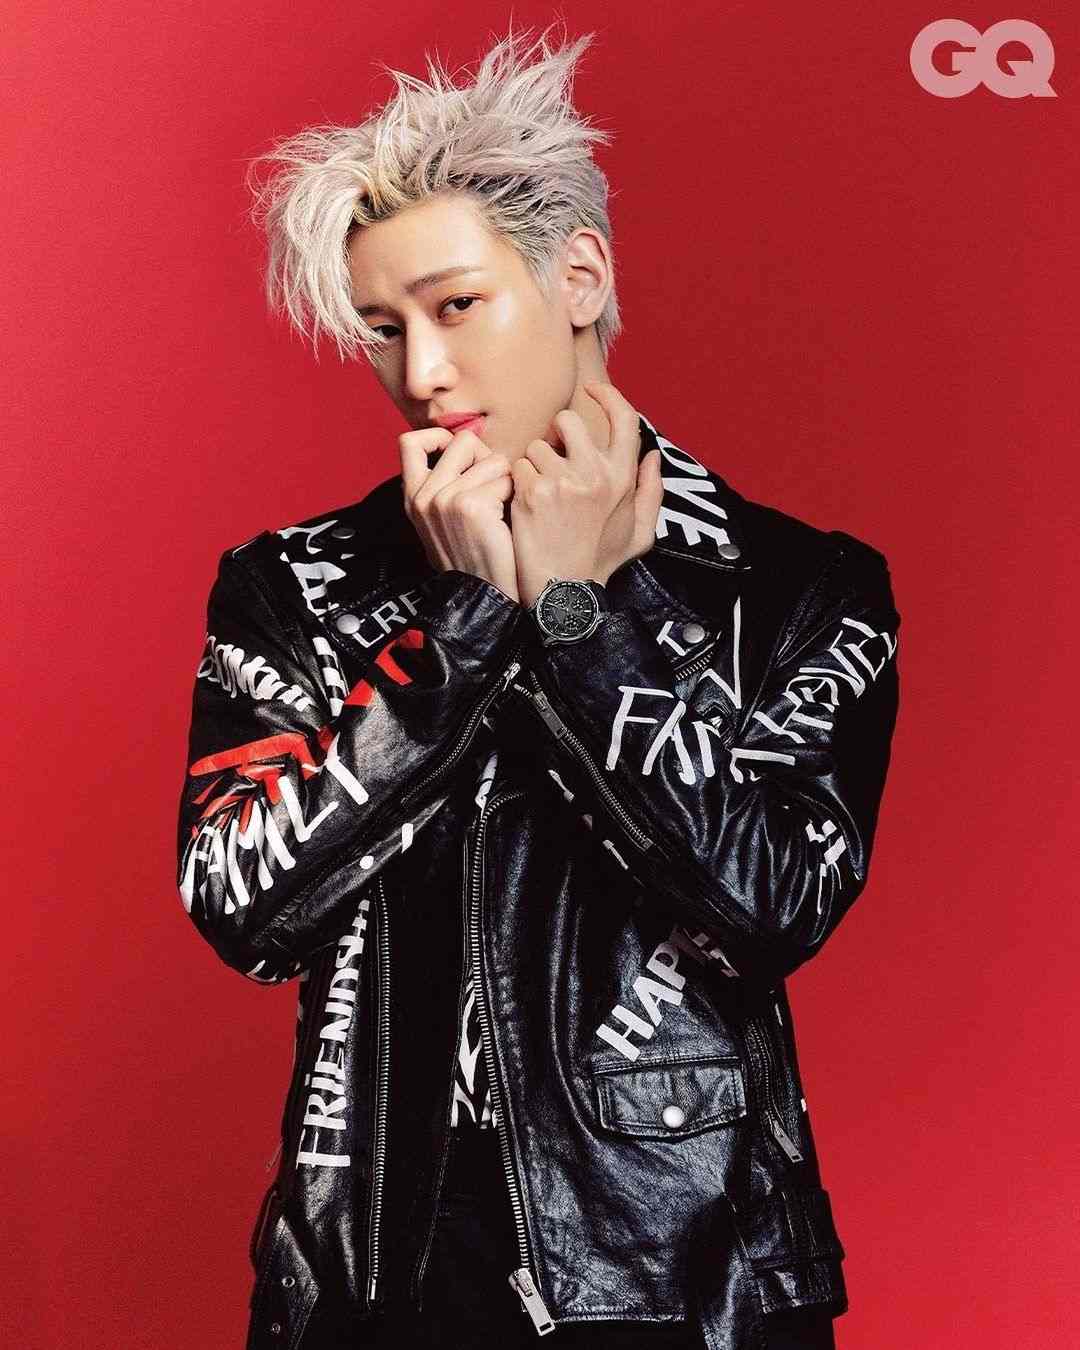 Bambam GOT7 - Biography, Profile, Facts, and Career